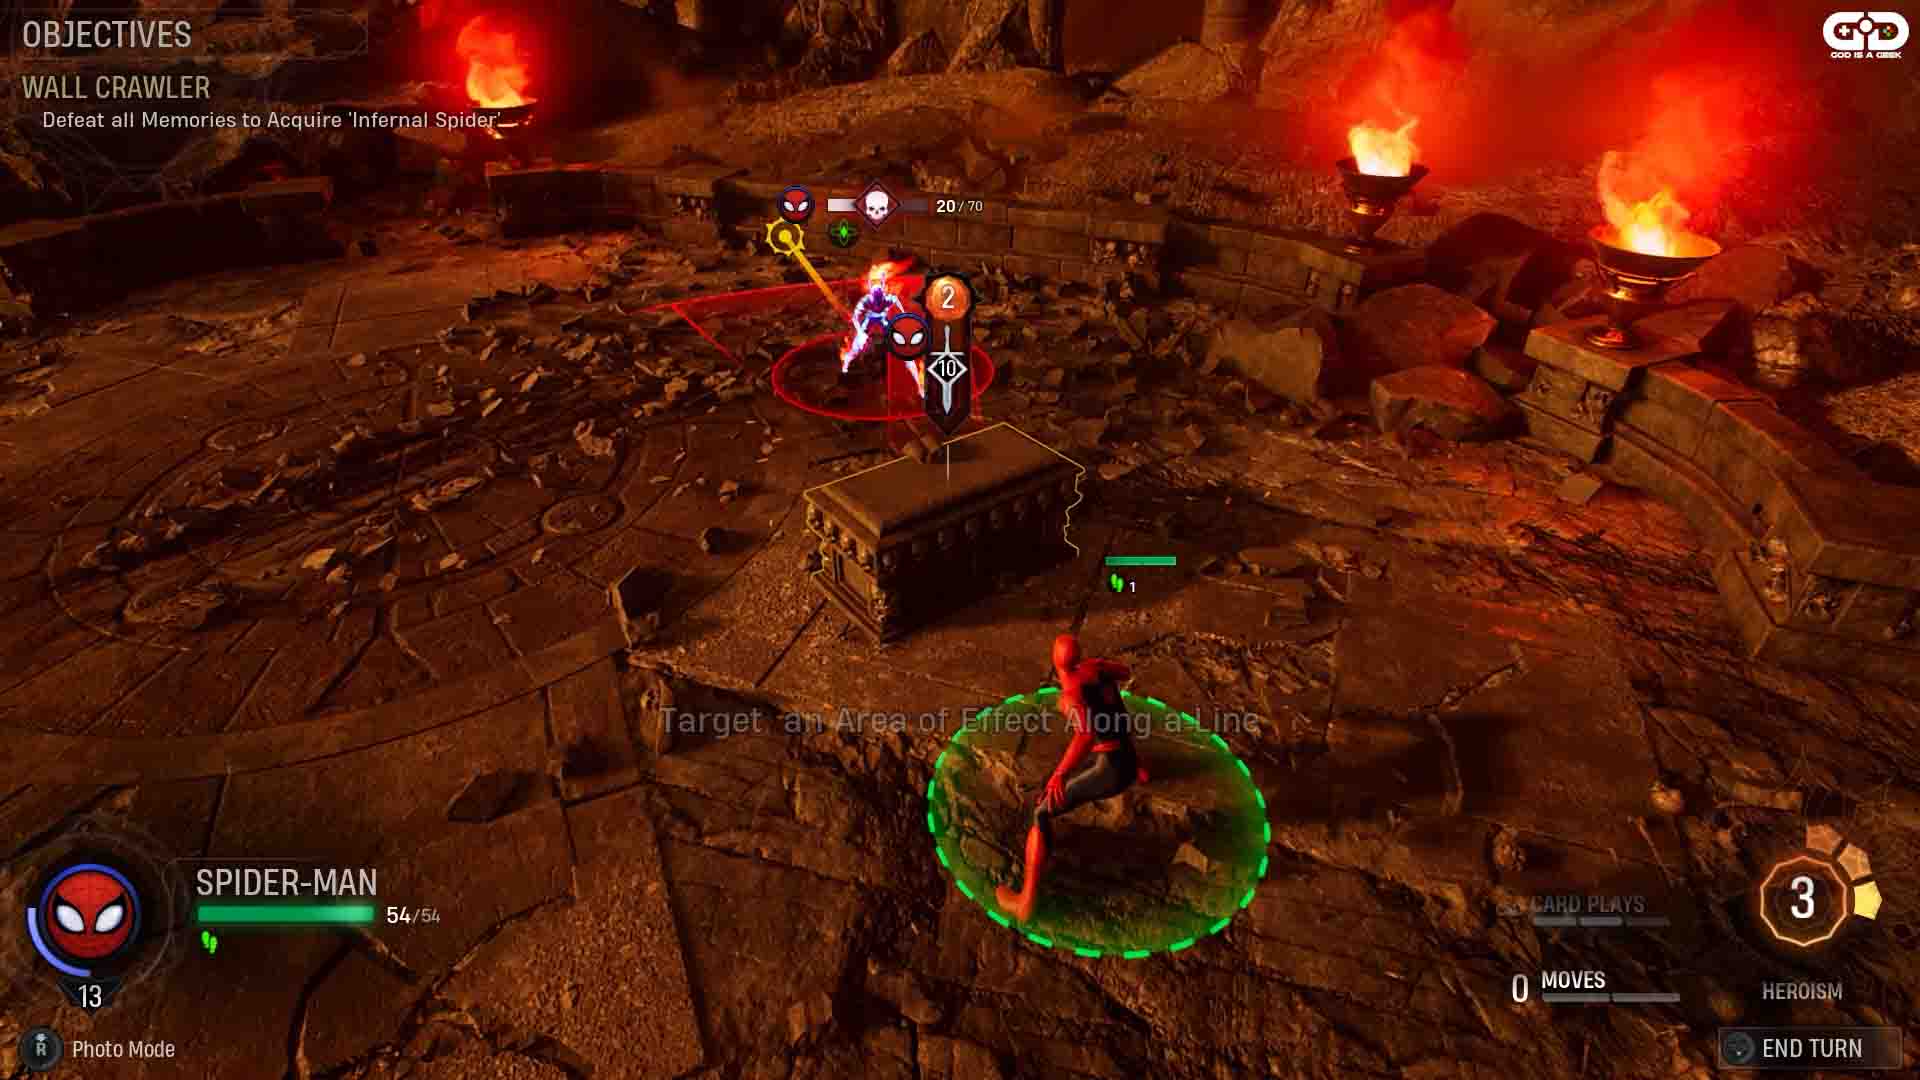 Watch Spider-Man's gameplay in Marvel's Midnight Suns - Times of India